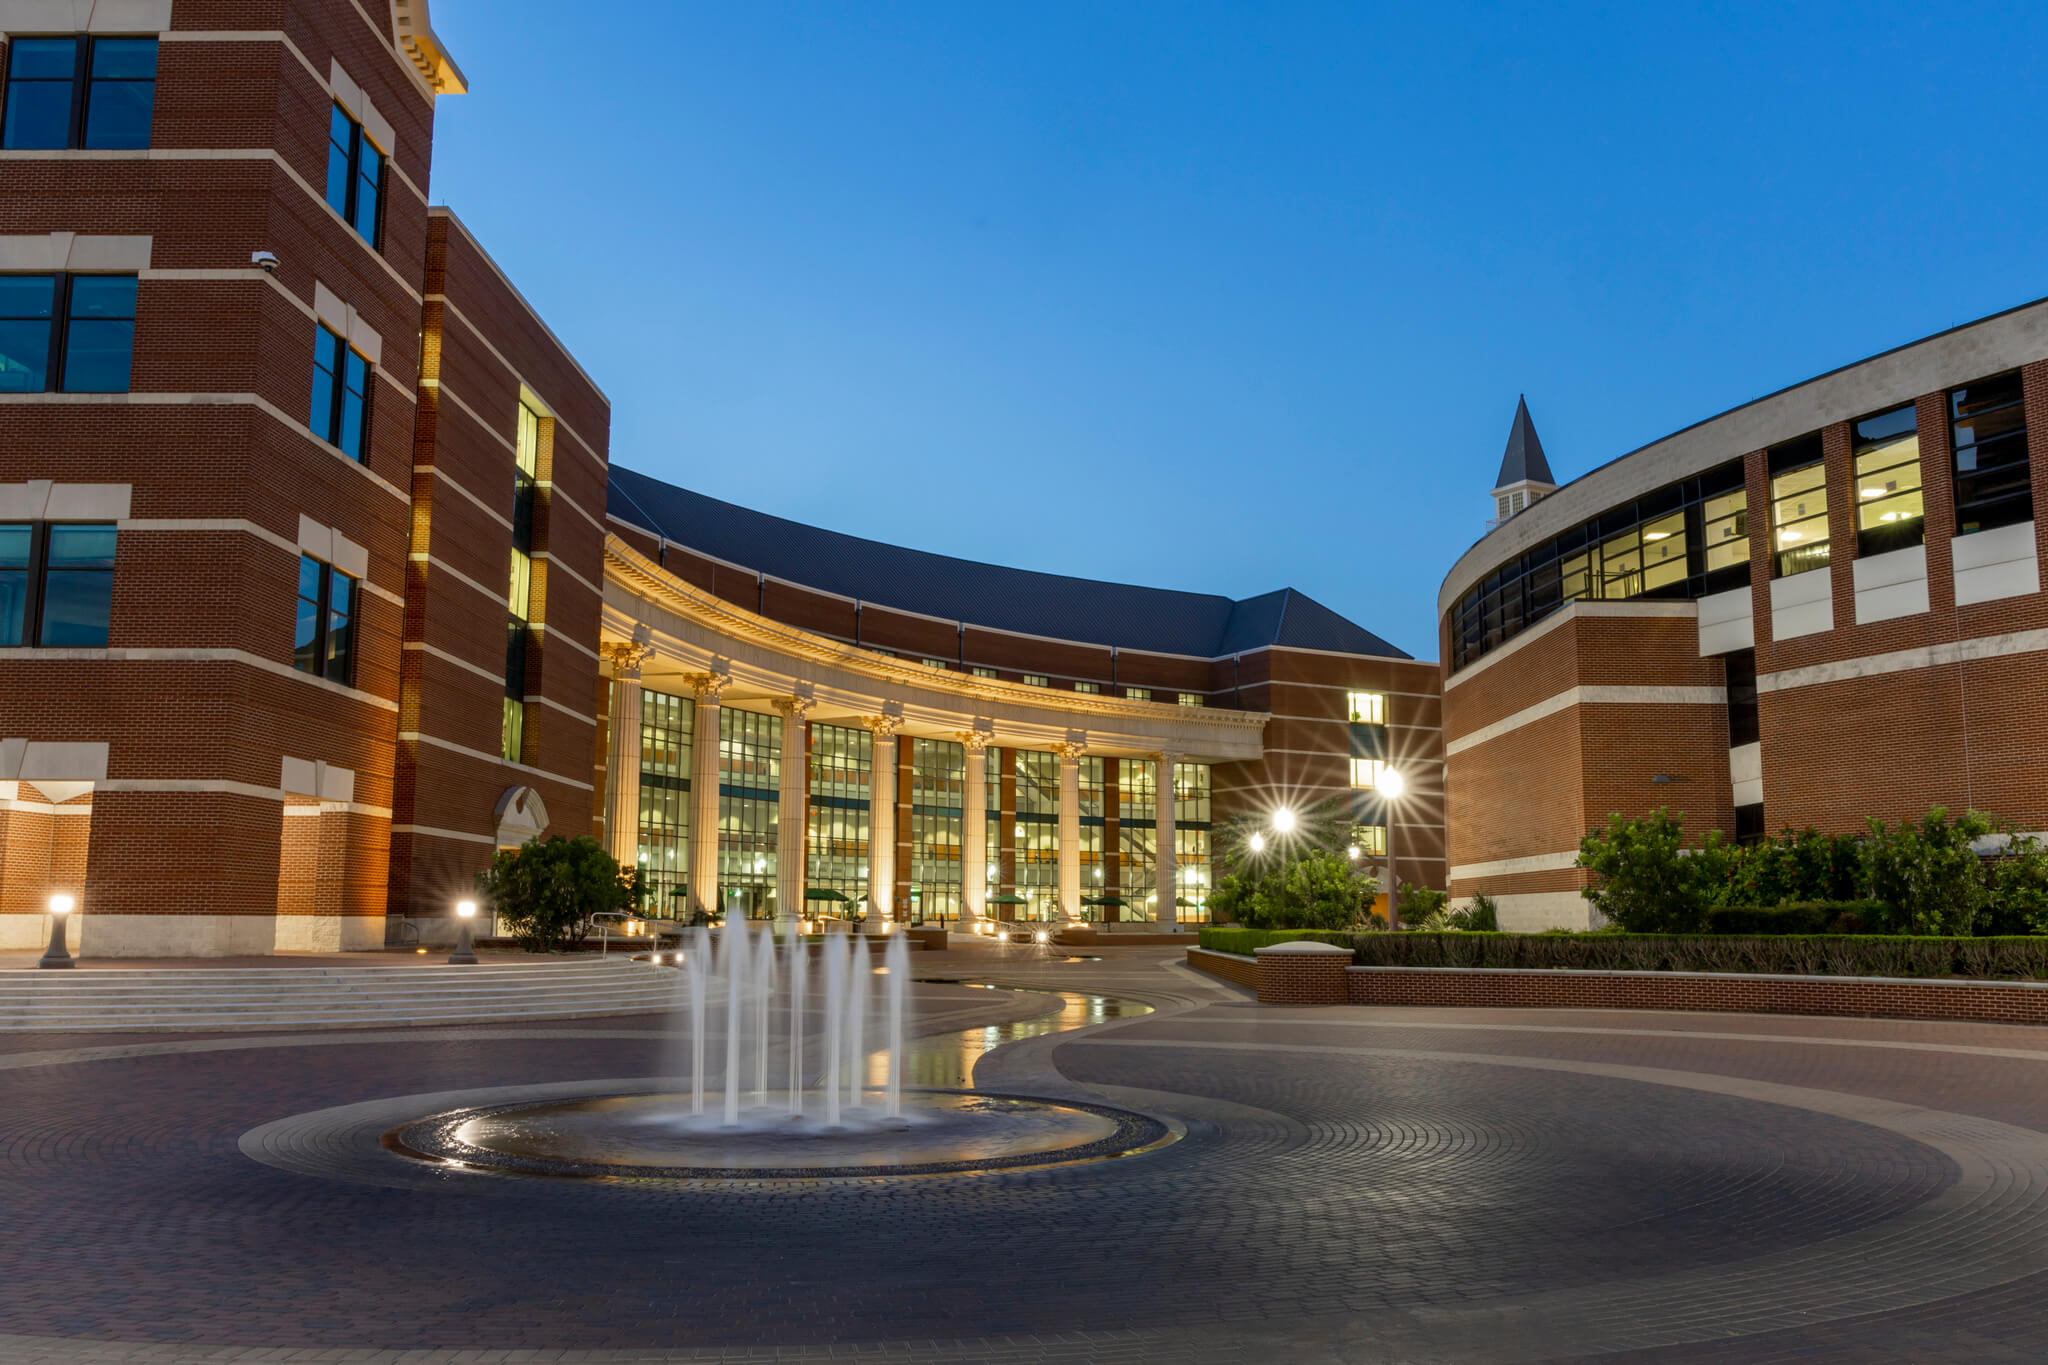 Baylor Campus building and fountain